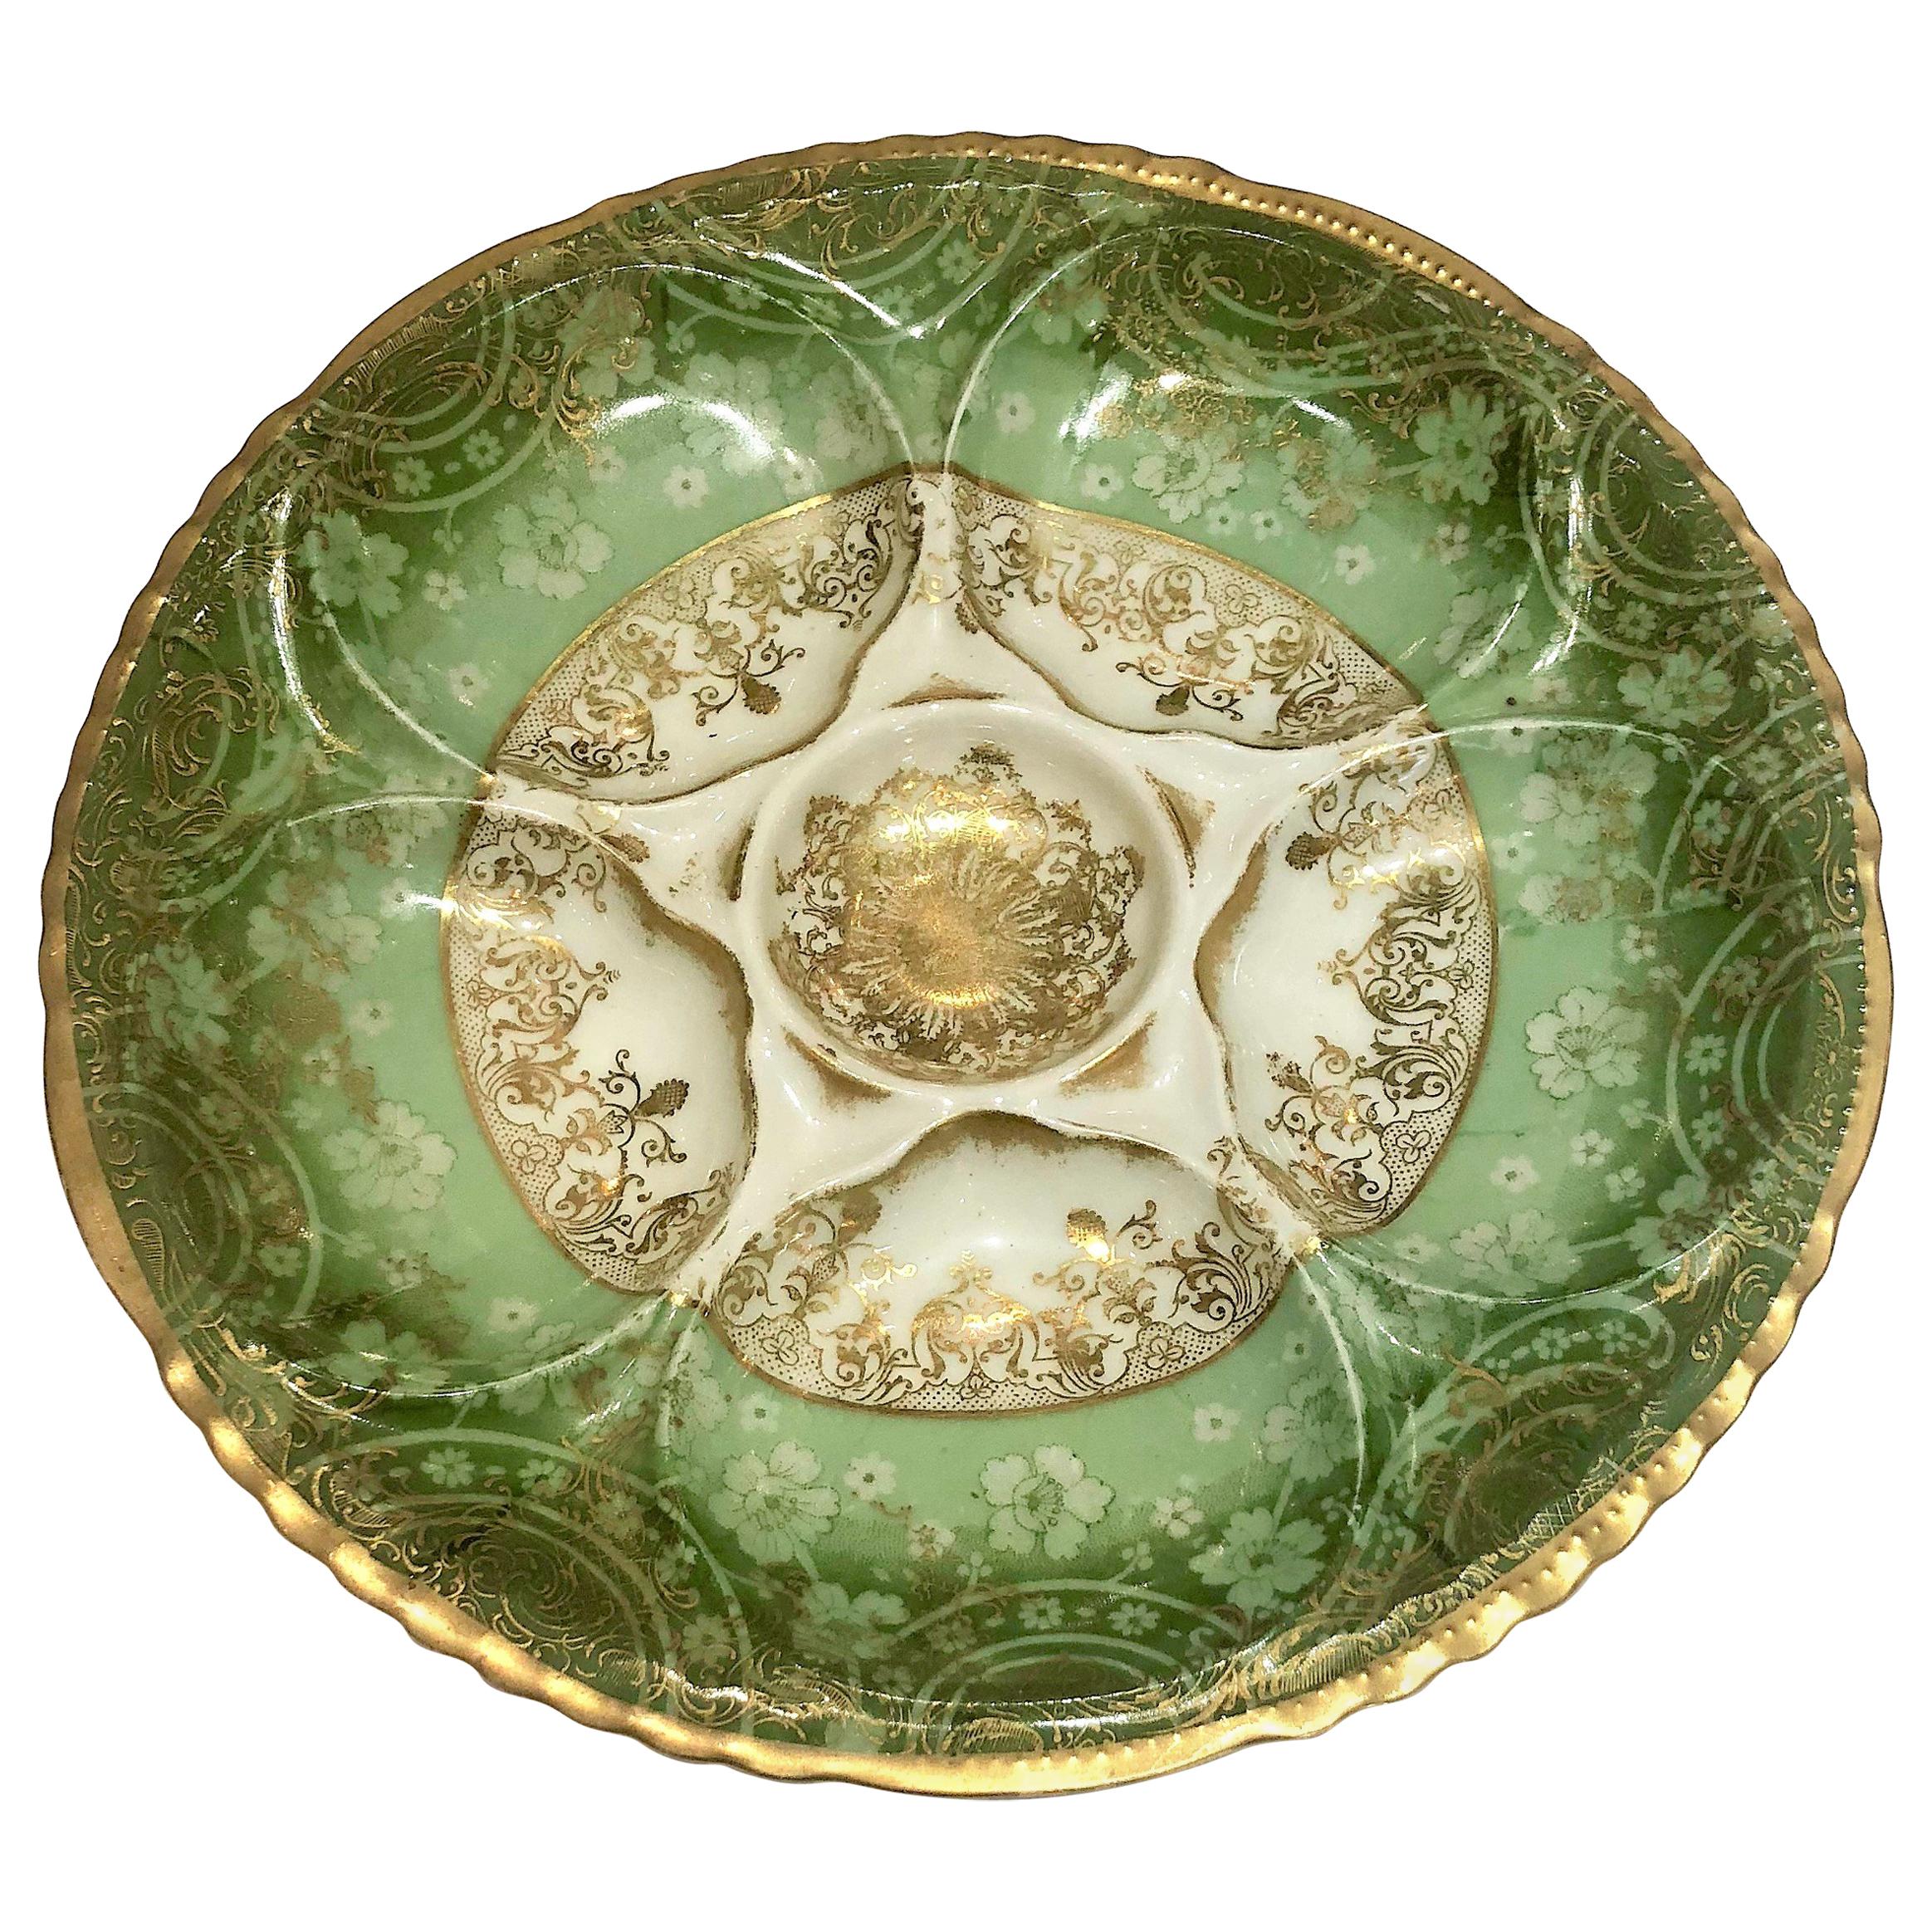 Antique French Porcelain Oyster Plate Made for Bailey Banks & Biddle, circa 1890